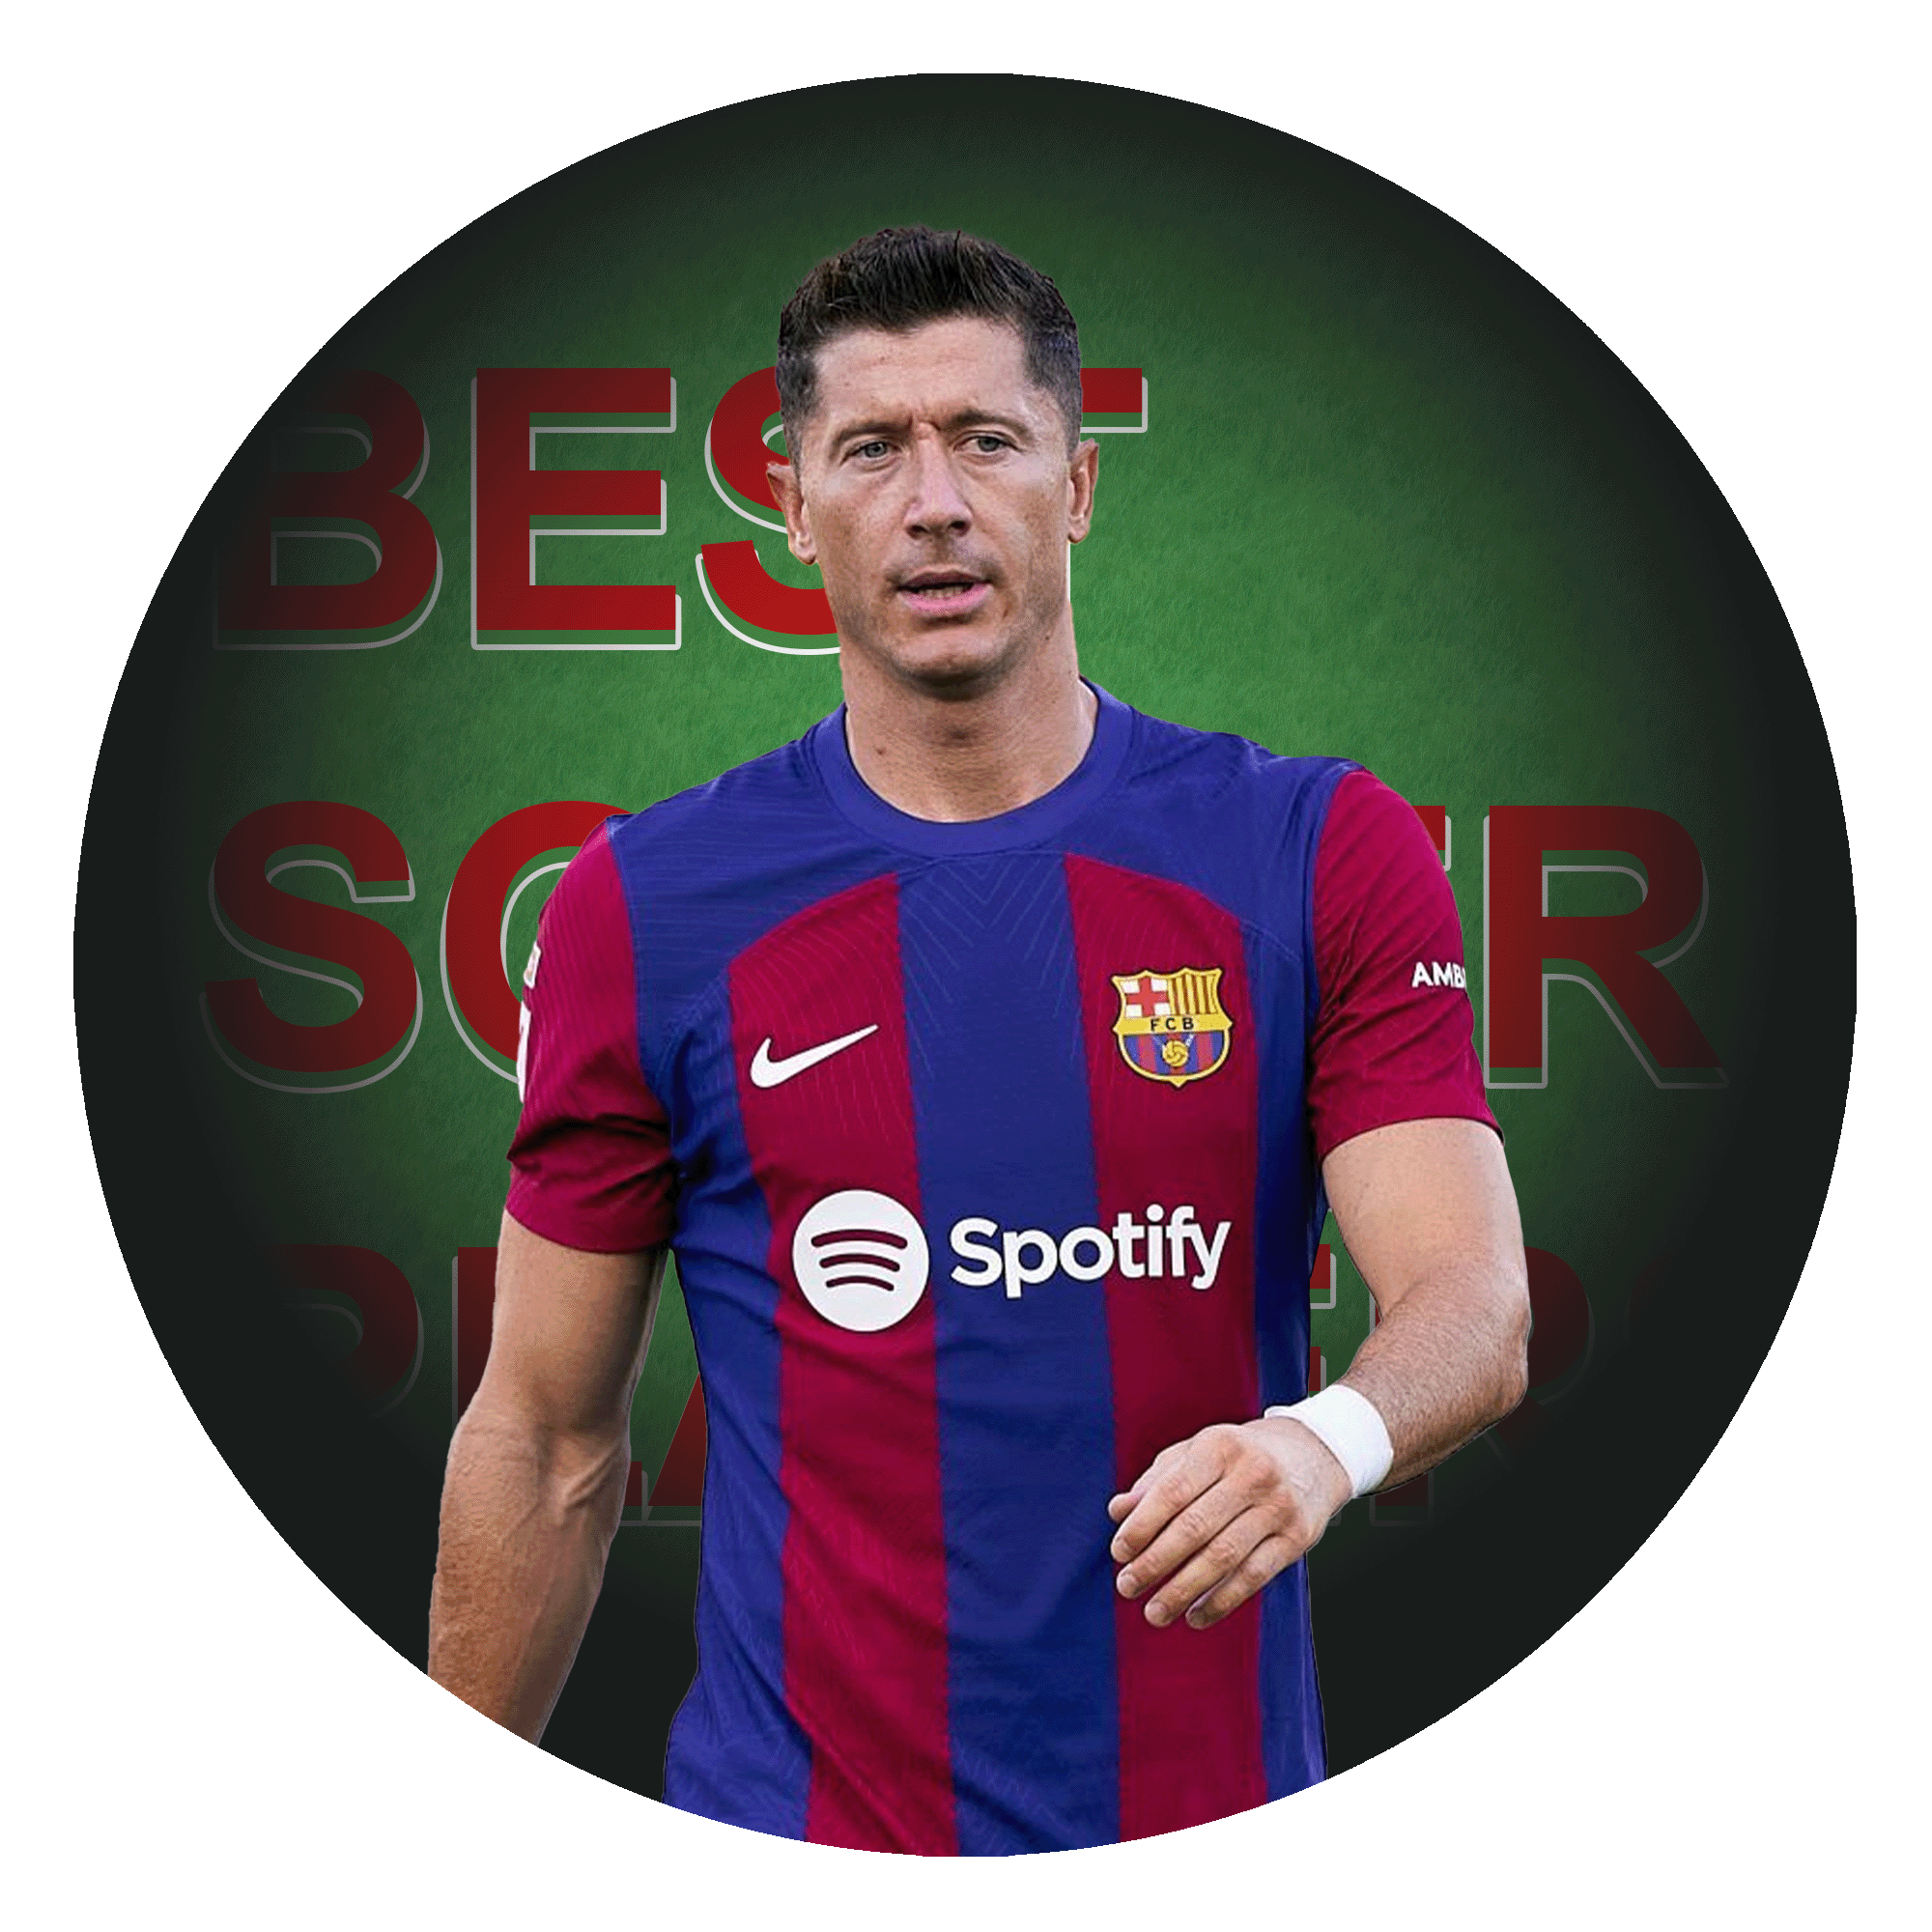 BESTSOCCER PLAYERS - Best Soccer Players